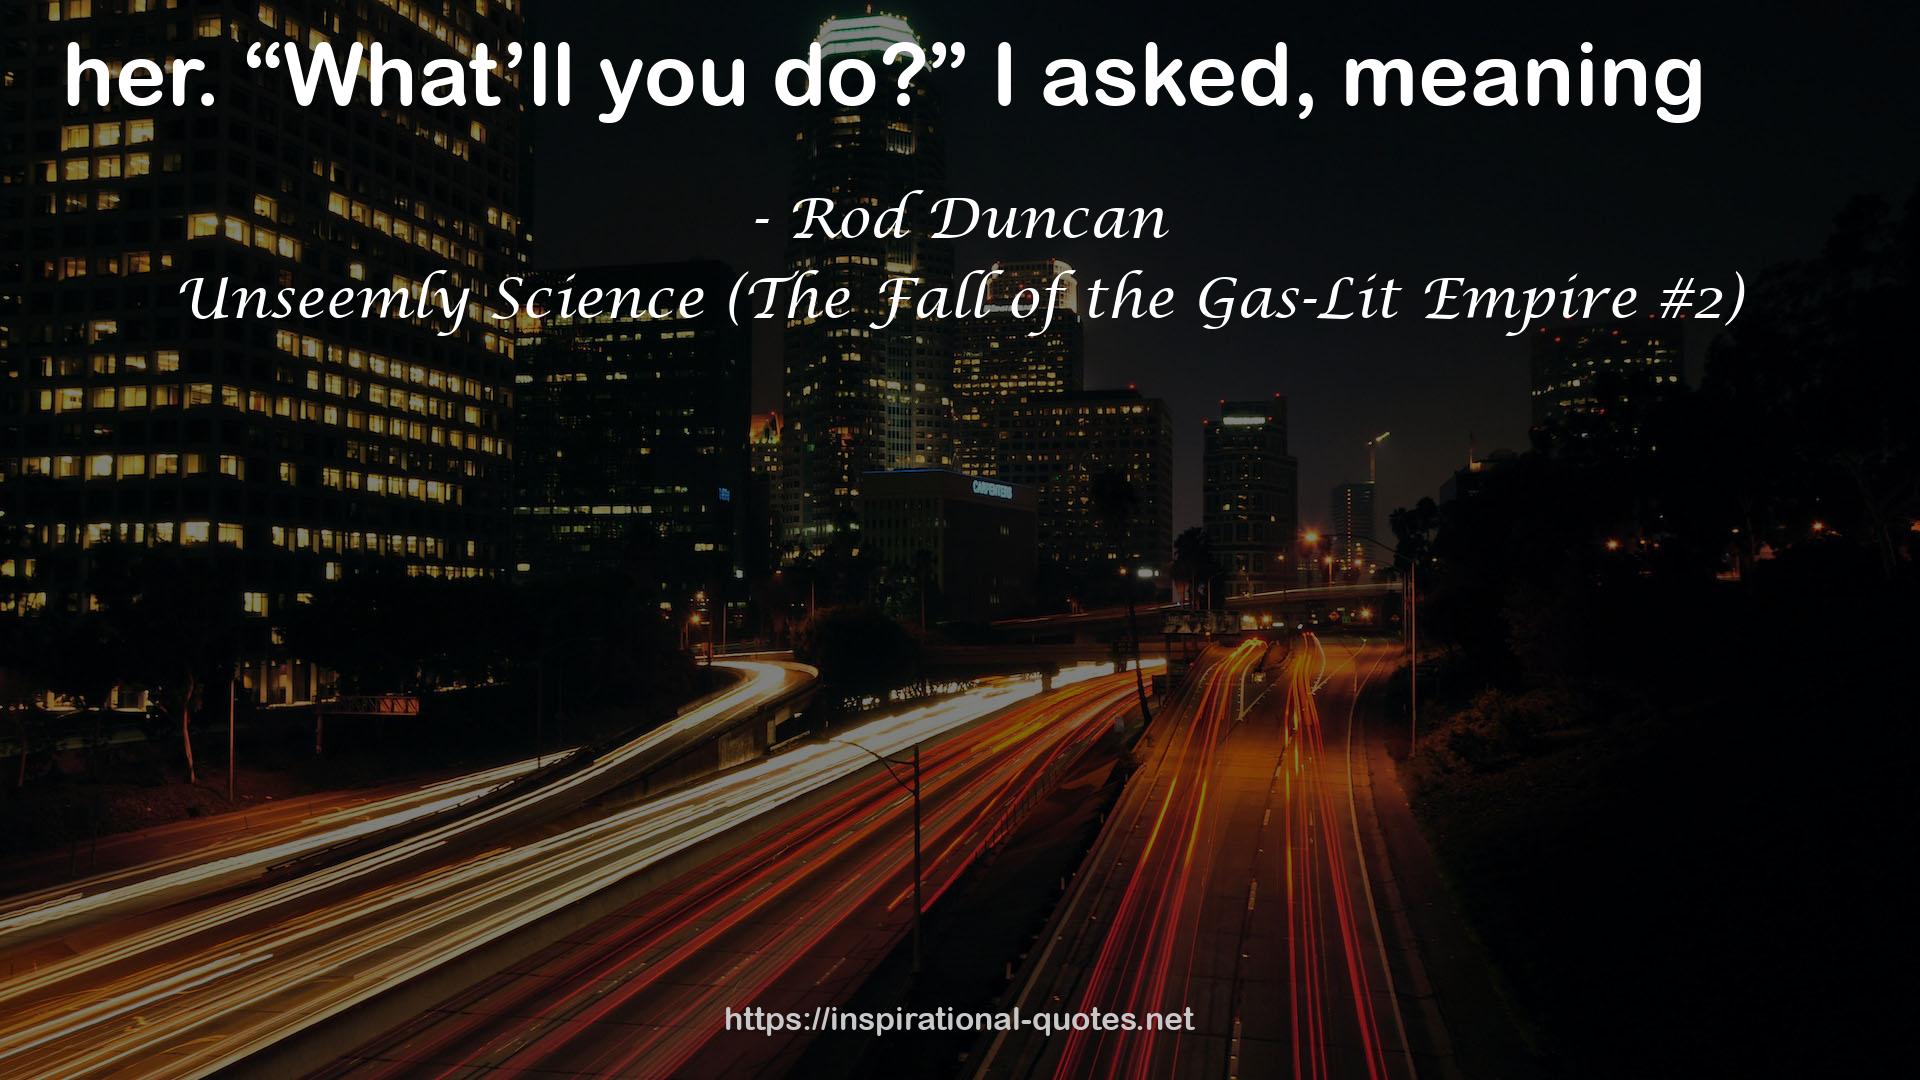 Rod Duncan QUOTES